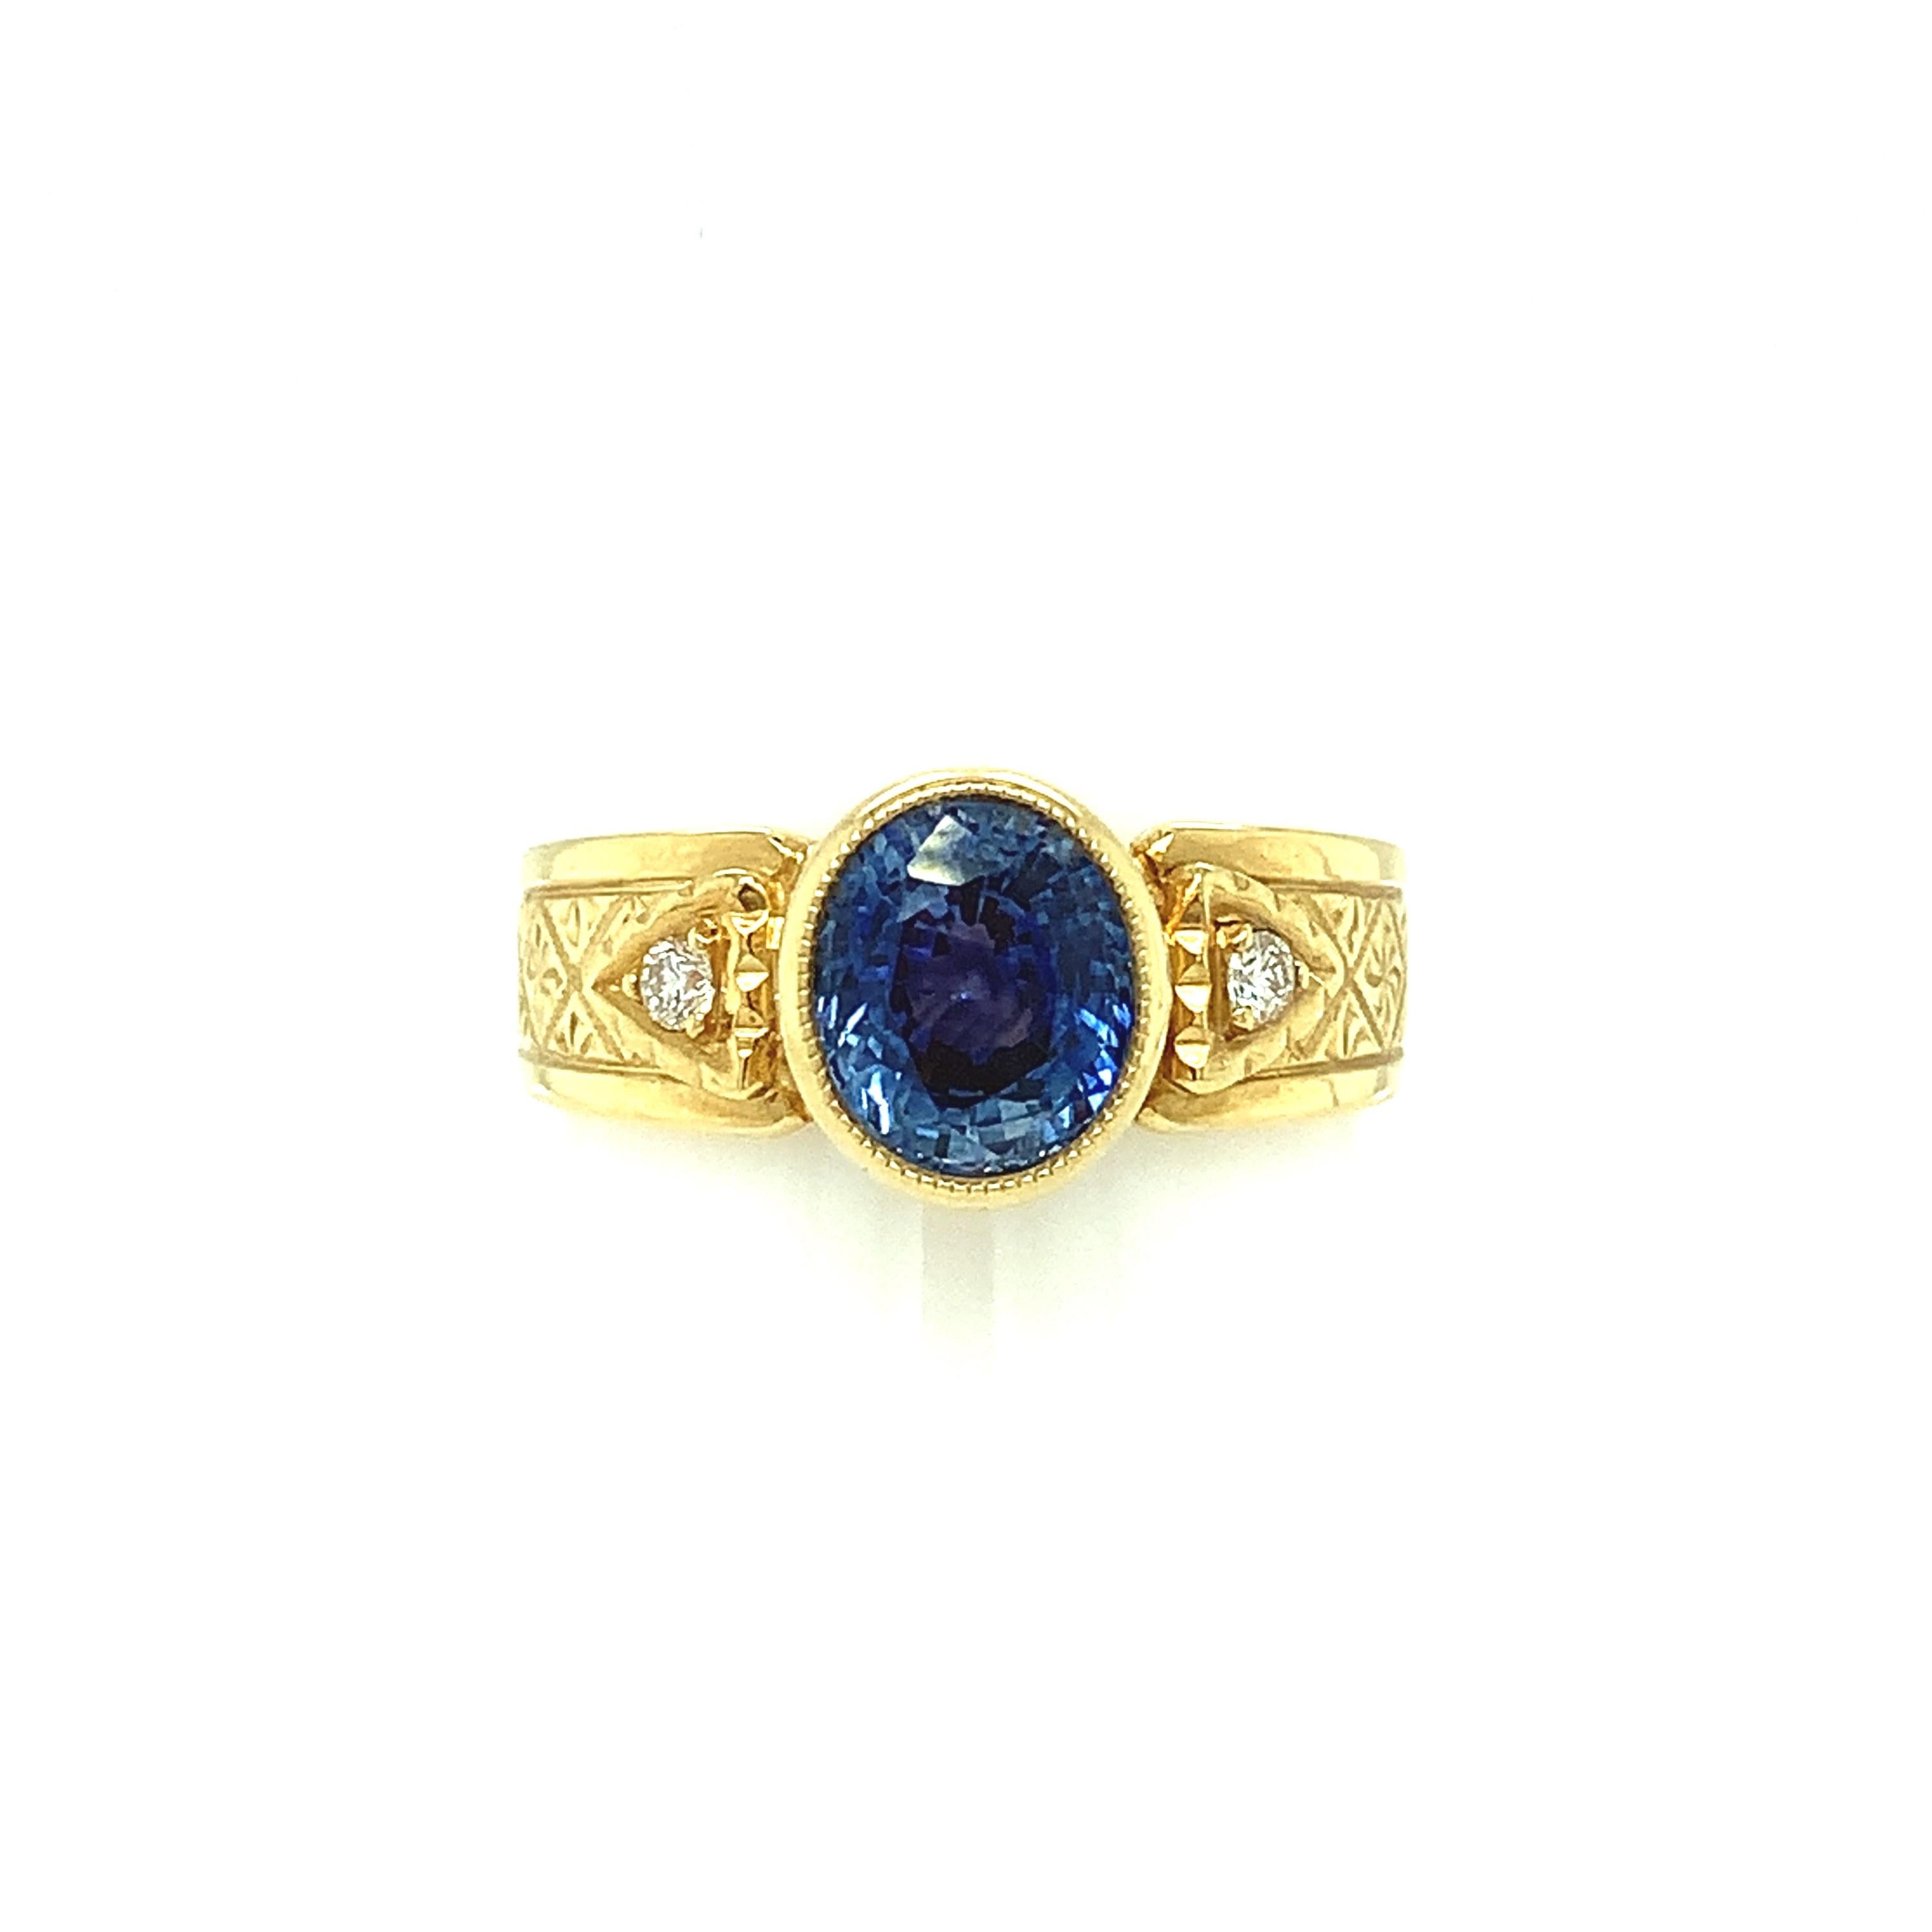 A bright, 2.02 carat oval blue sapphire is featured in this handmade 18k yellow gold ring. The sapphire is a beautiful medium blue color and well-cut, giving it exceptional brilliance and life. The band is accented with two sparkling white diamonds